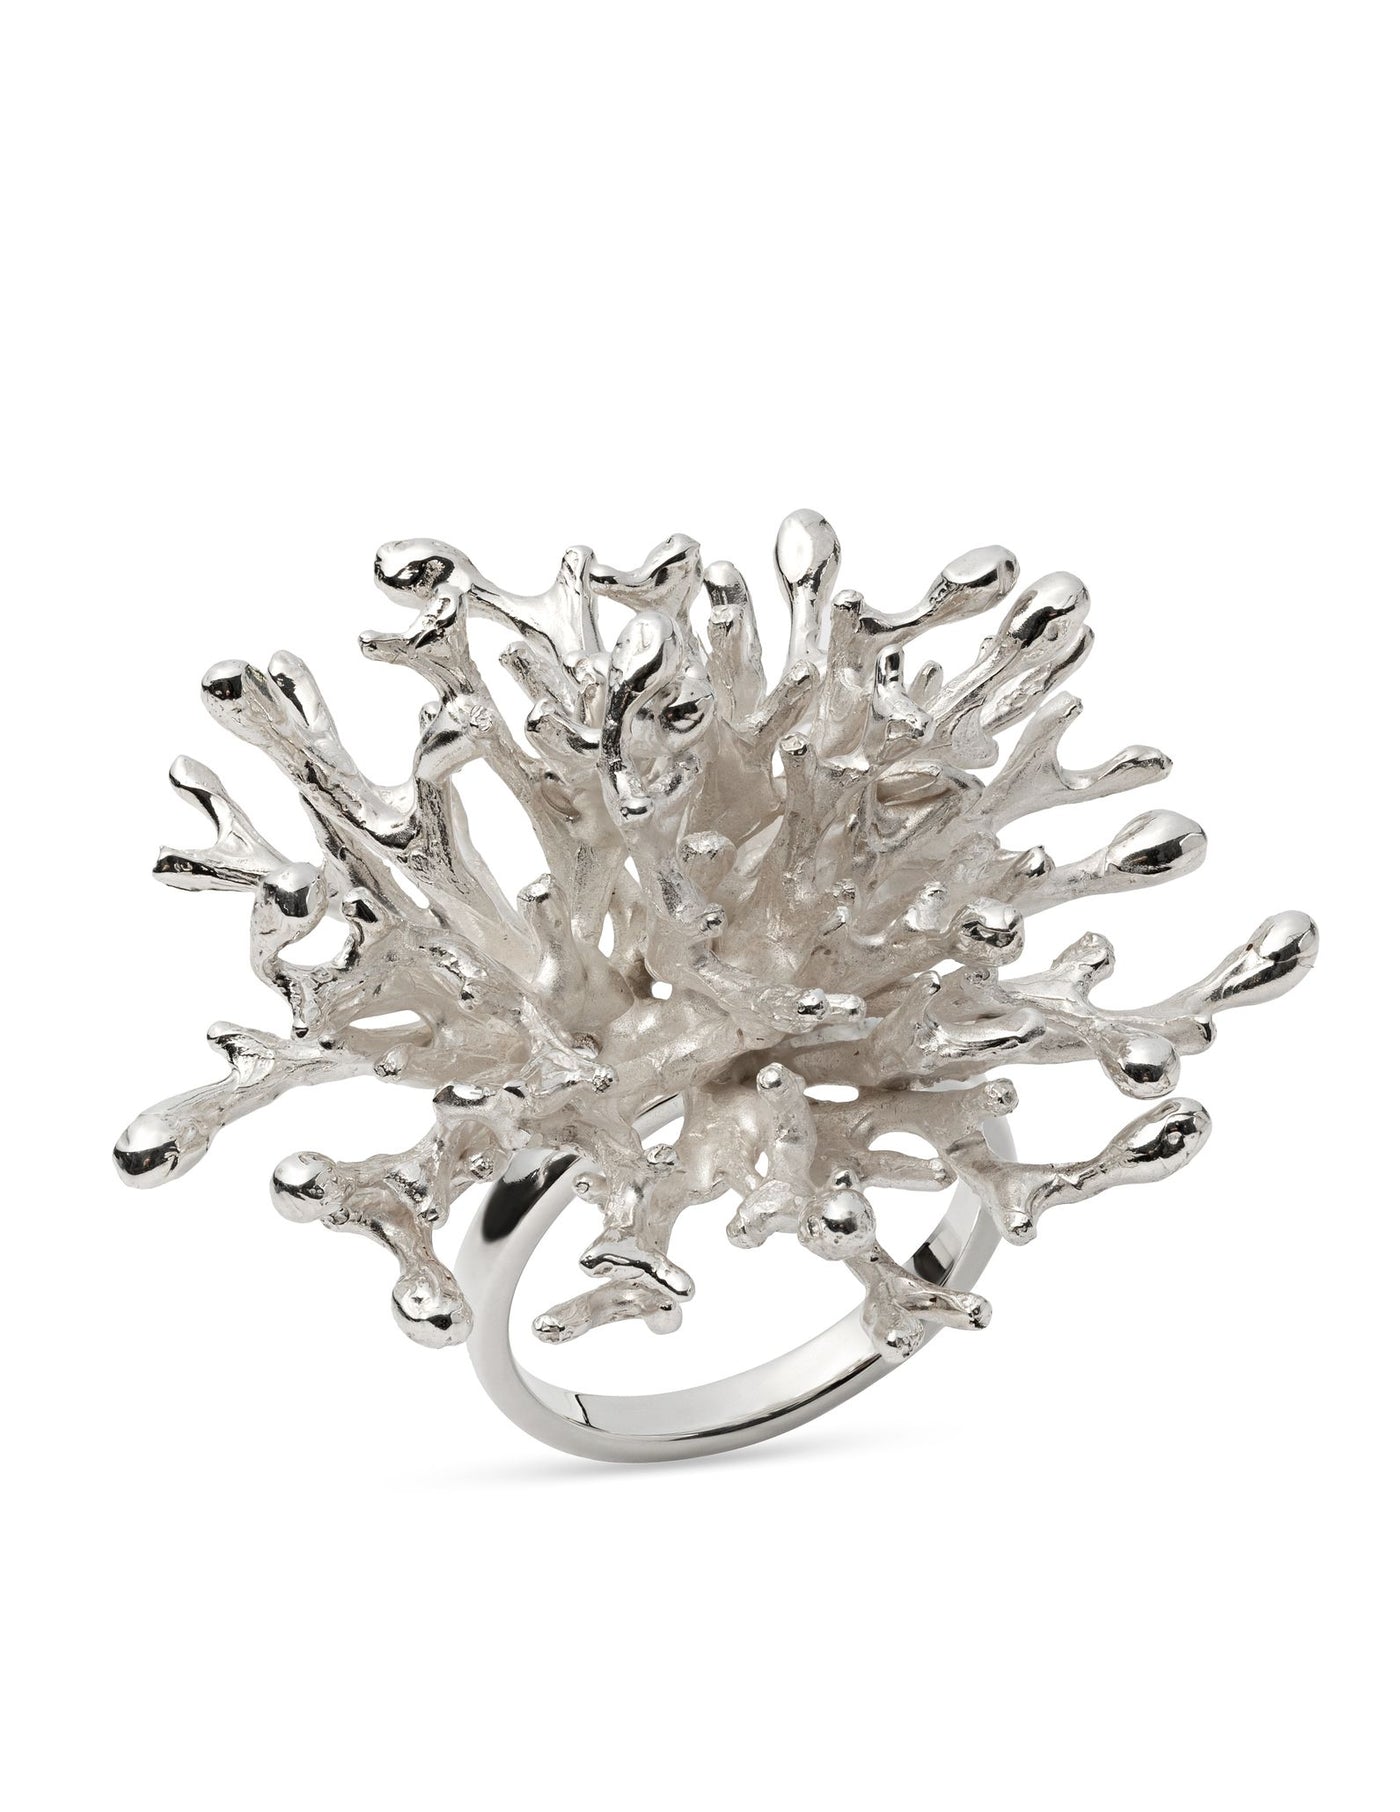 Silver ring "CORAL"